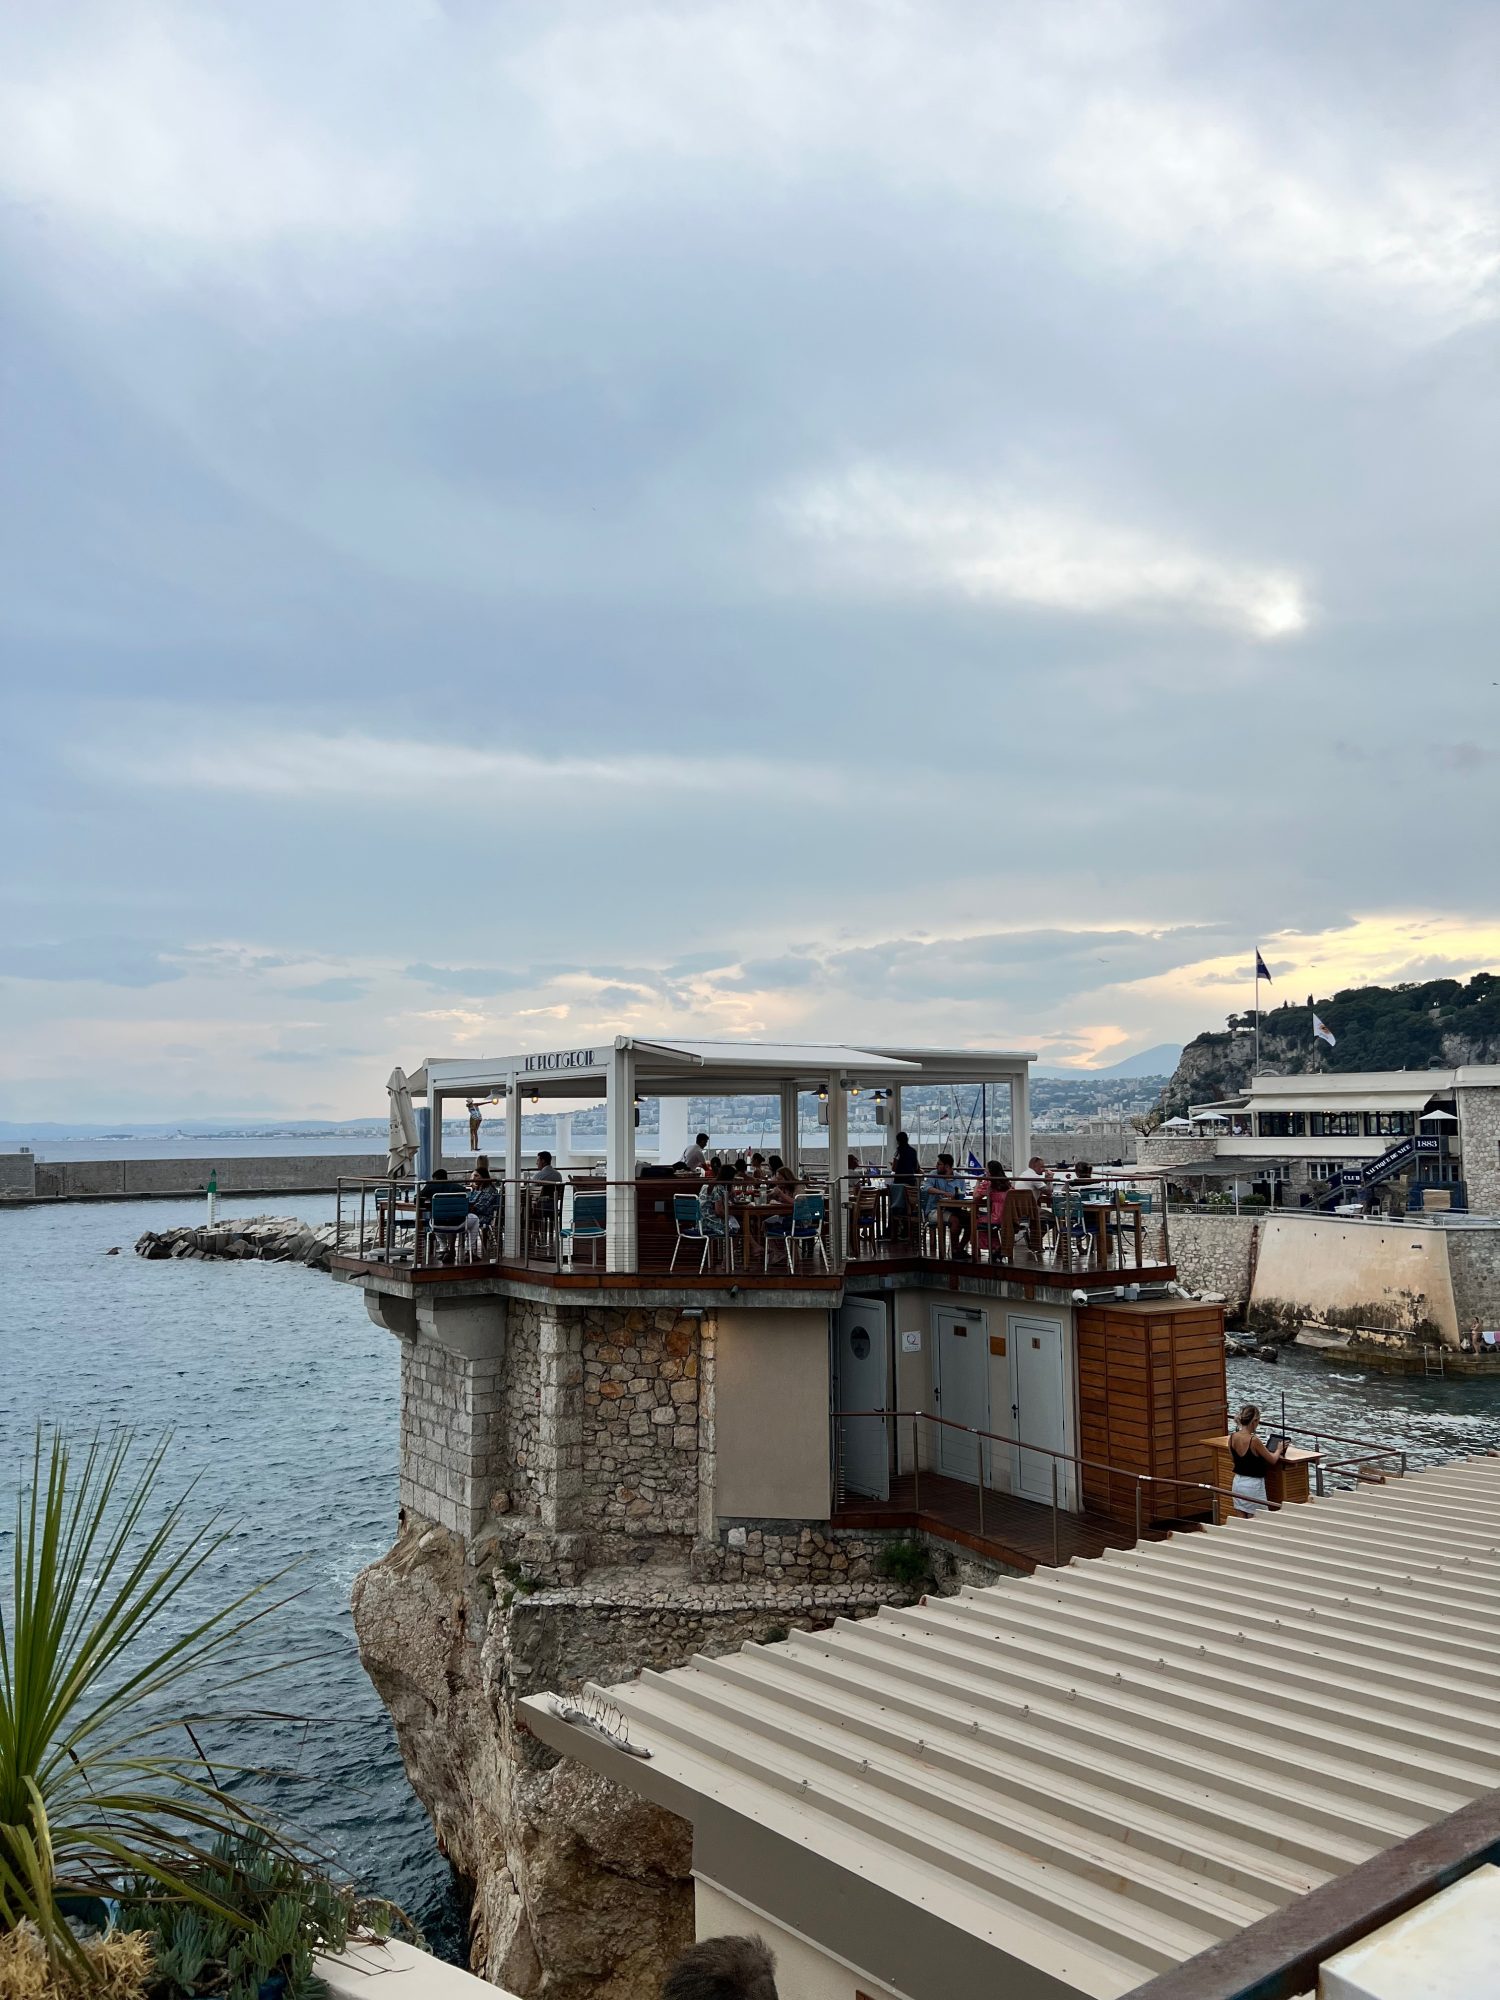 Scenic view of the old diving dock turned into award winning restaurant, Le Plongeoir.